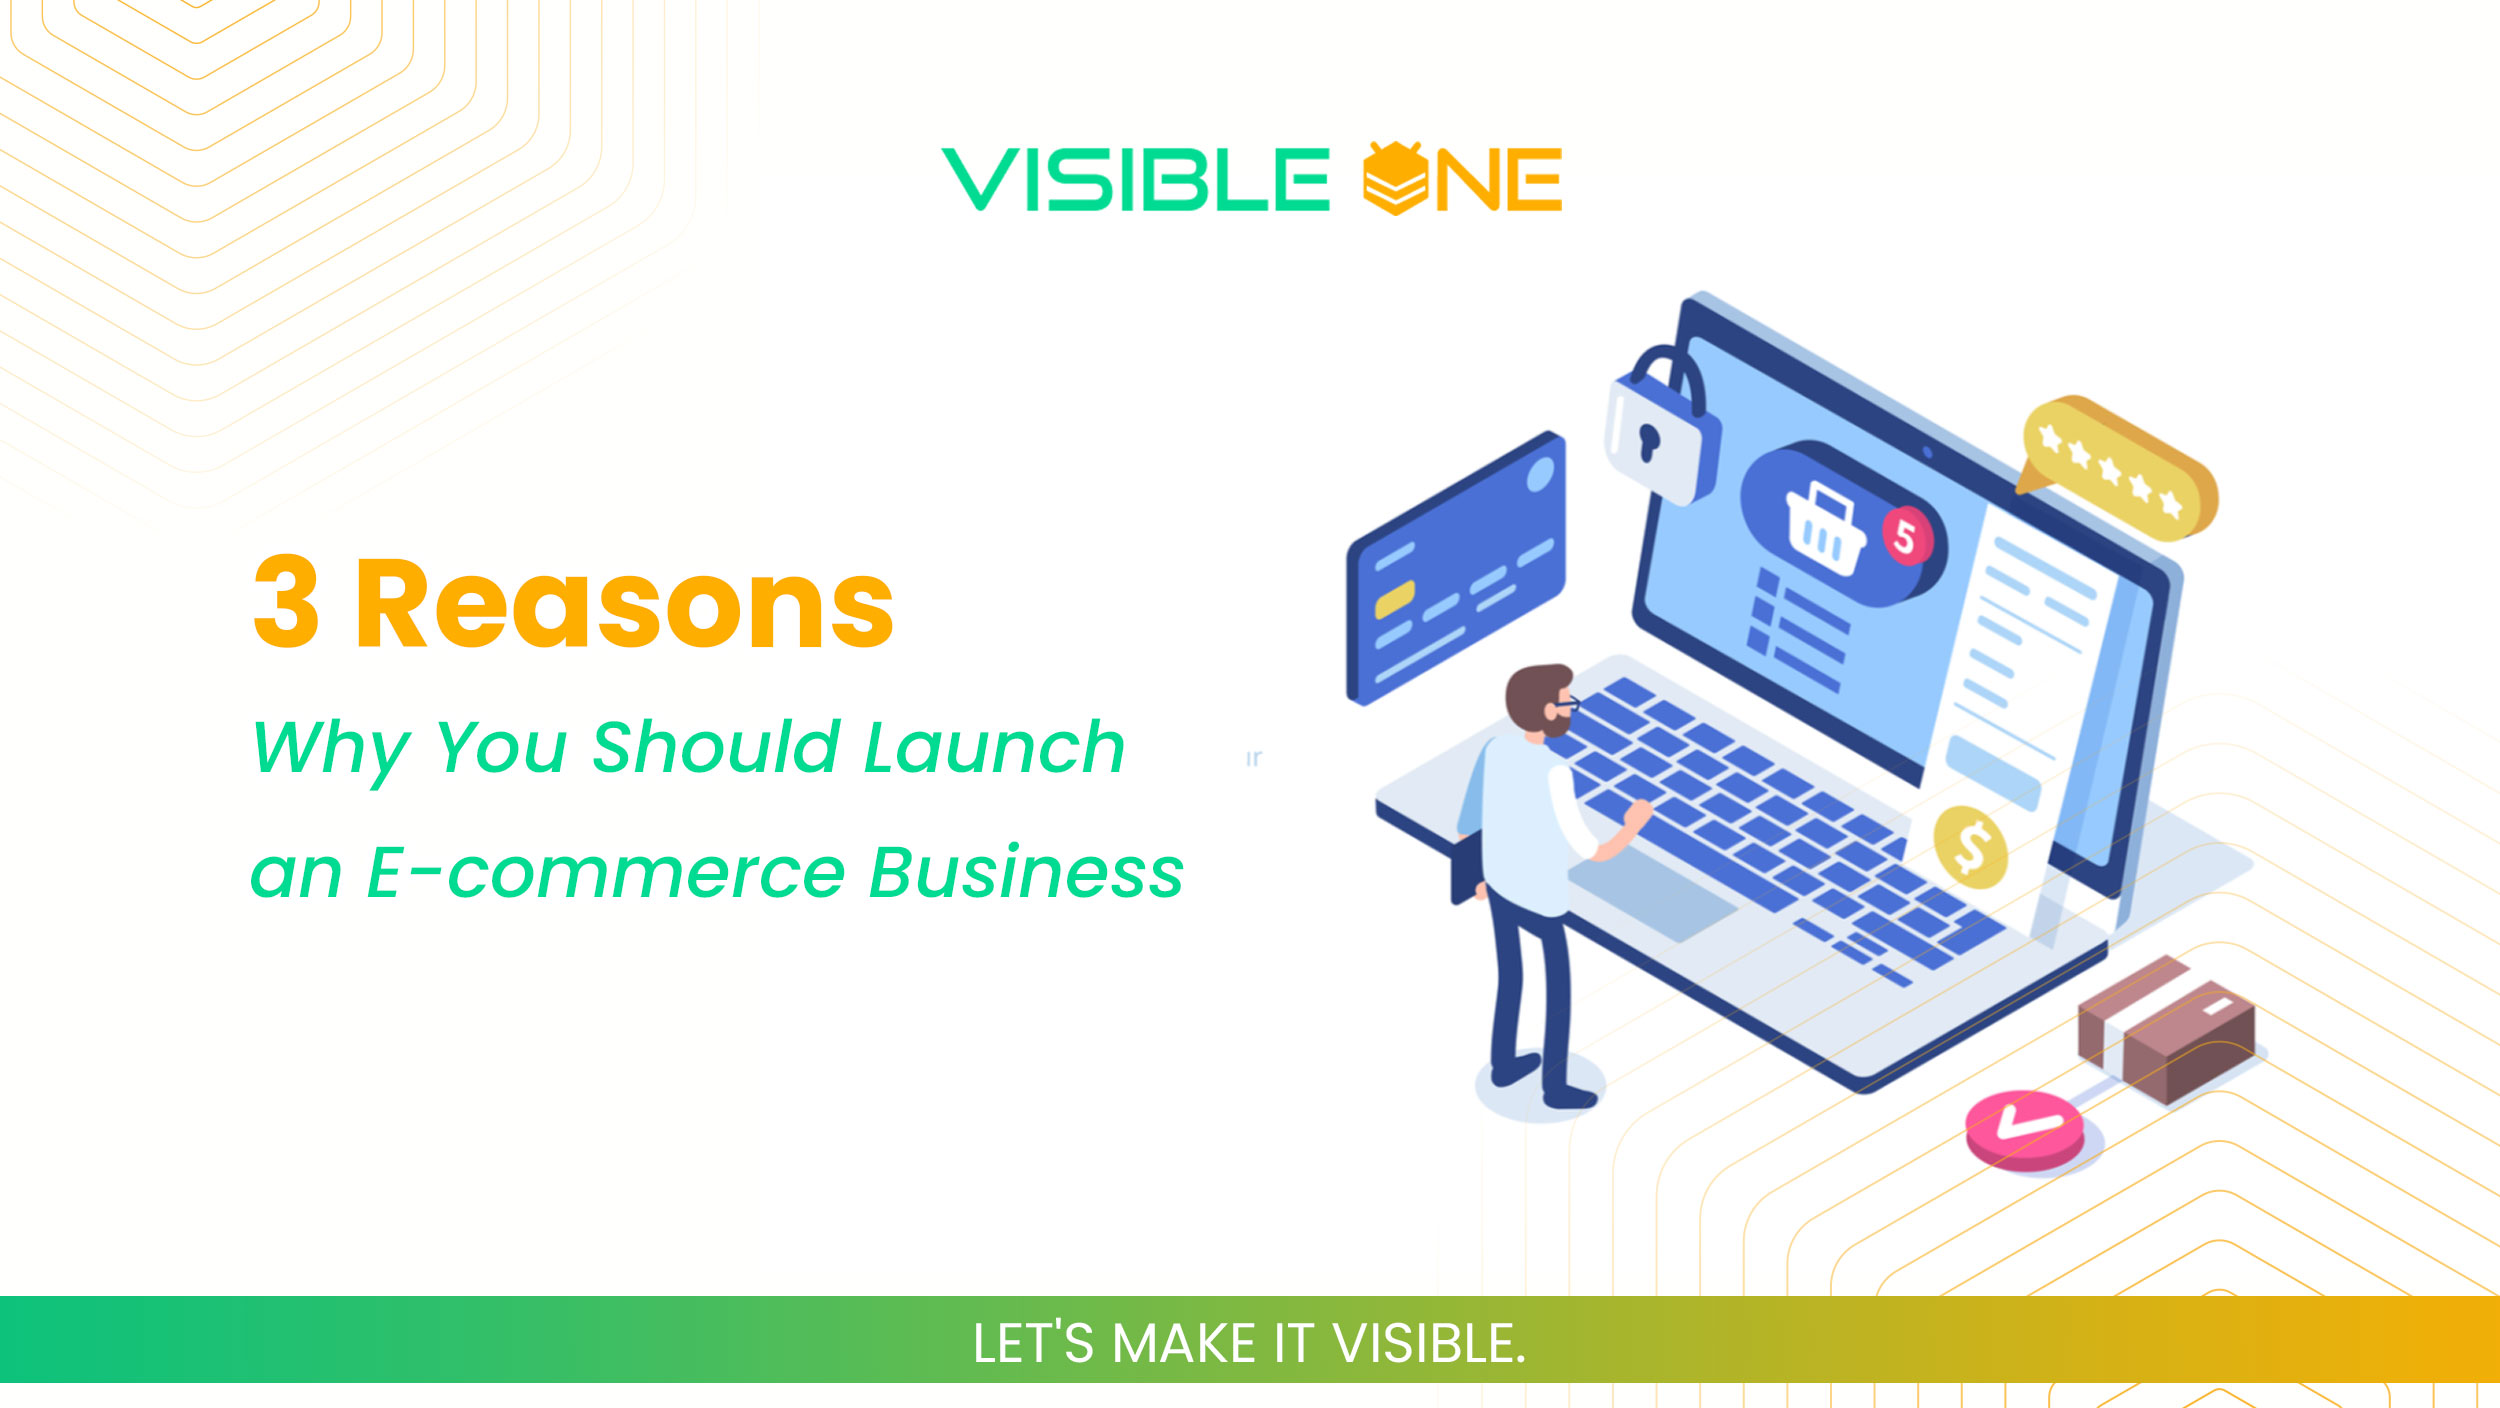 3 Reasons Why You Should Launch an E-commerce Business